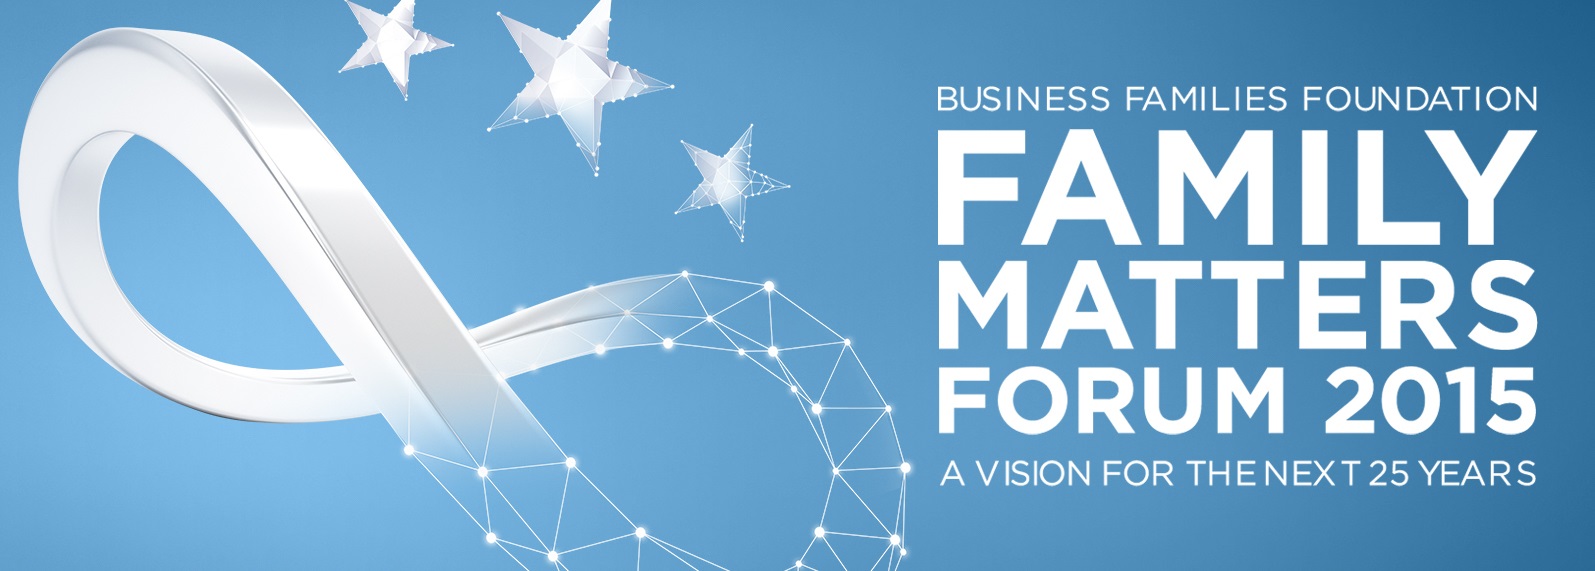 Business Families Foundation organizes Family Matters Forum 2015 in Miami